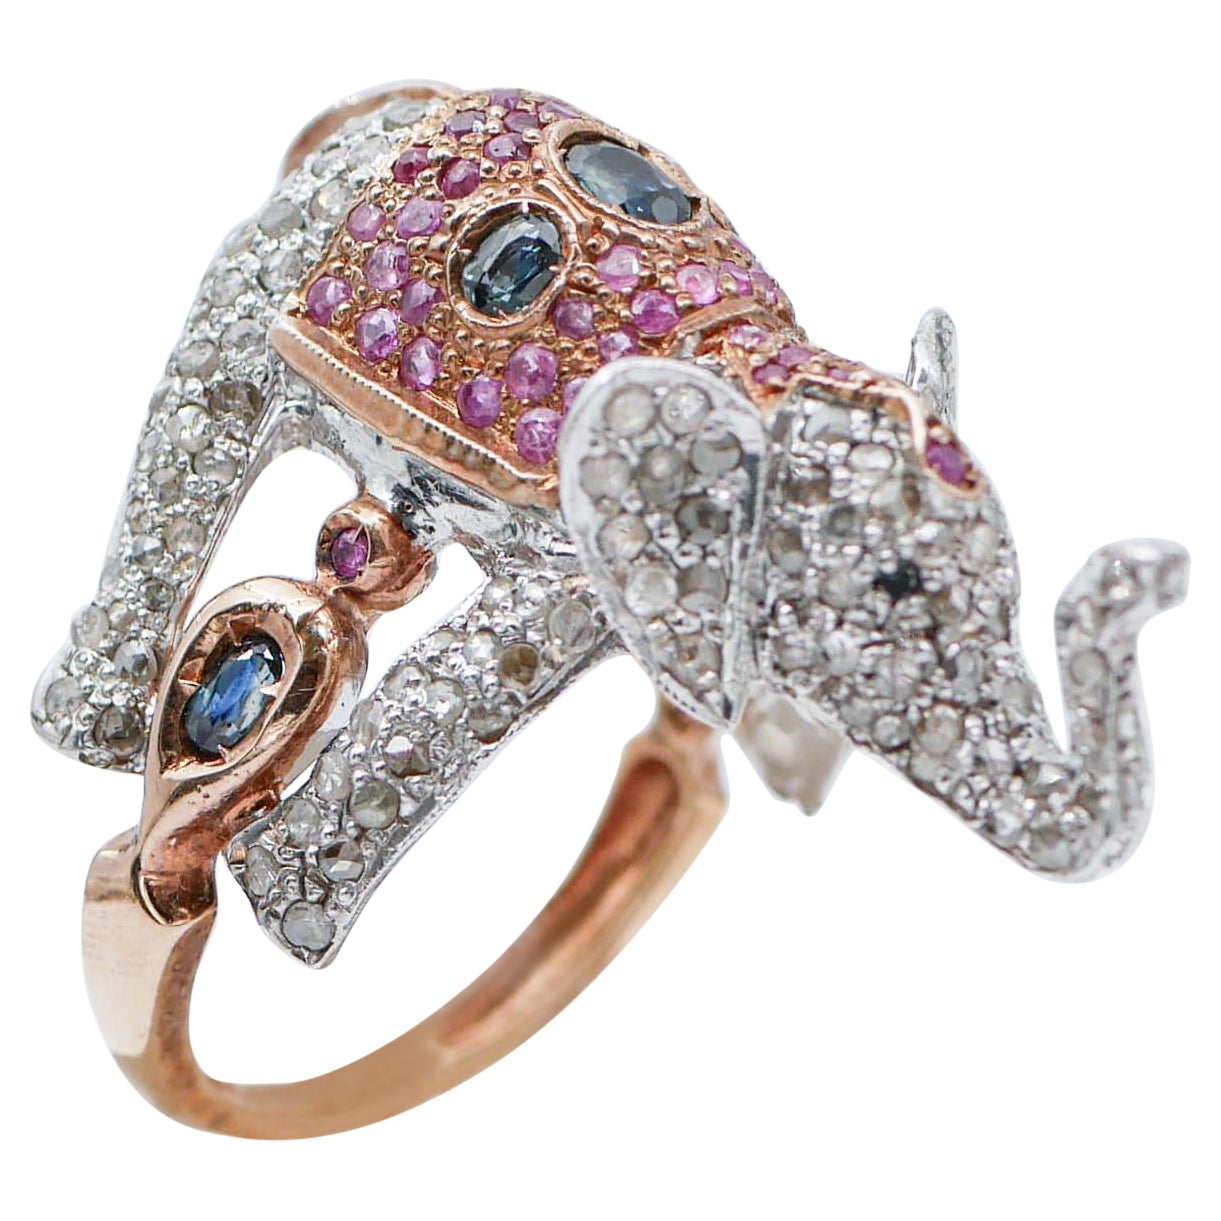 Sapphires, Rubies, Diamonds, Rose Gold and Silver Elephant Ring